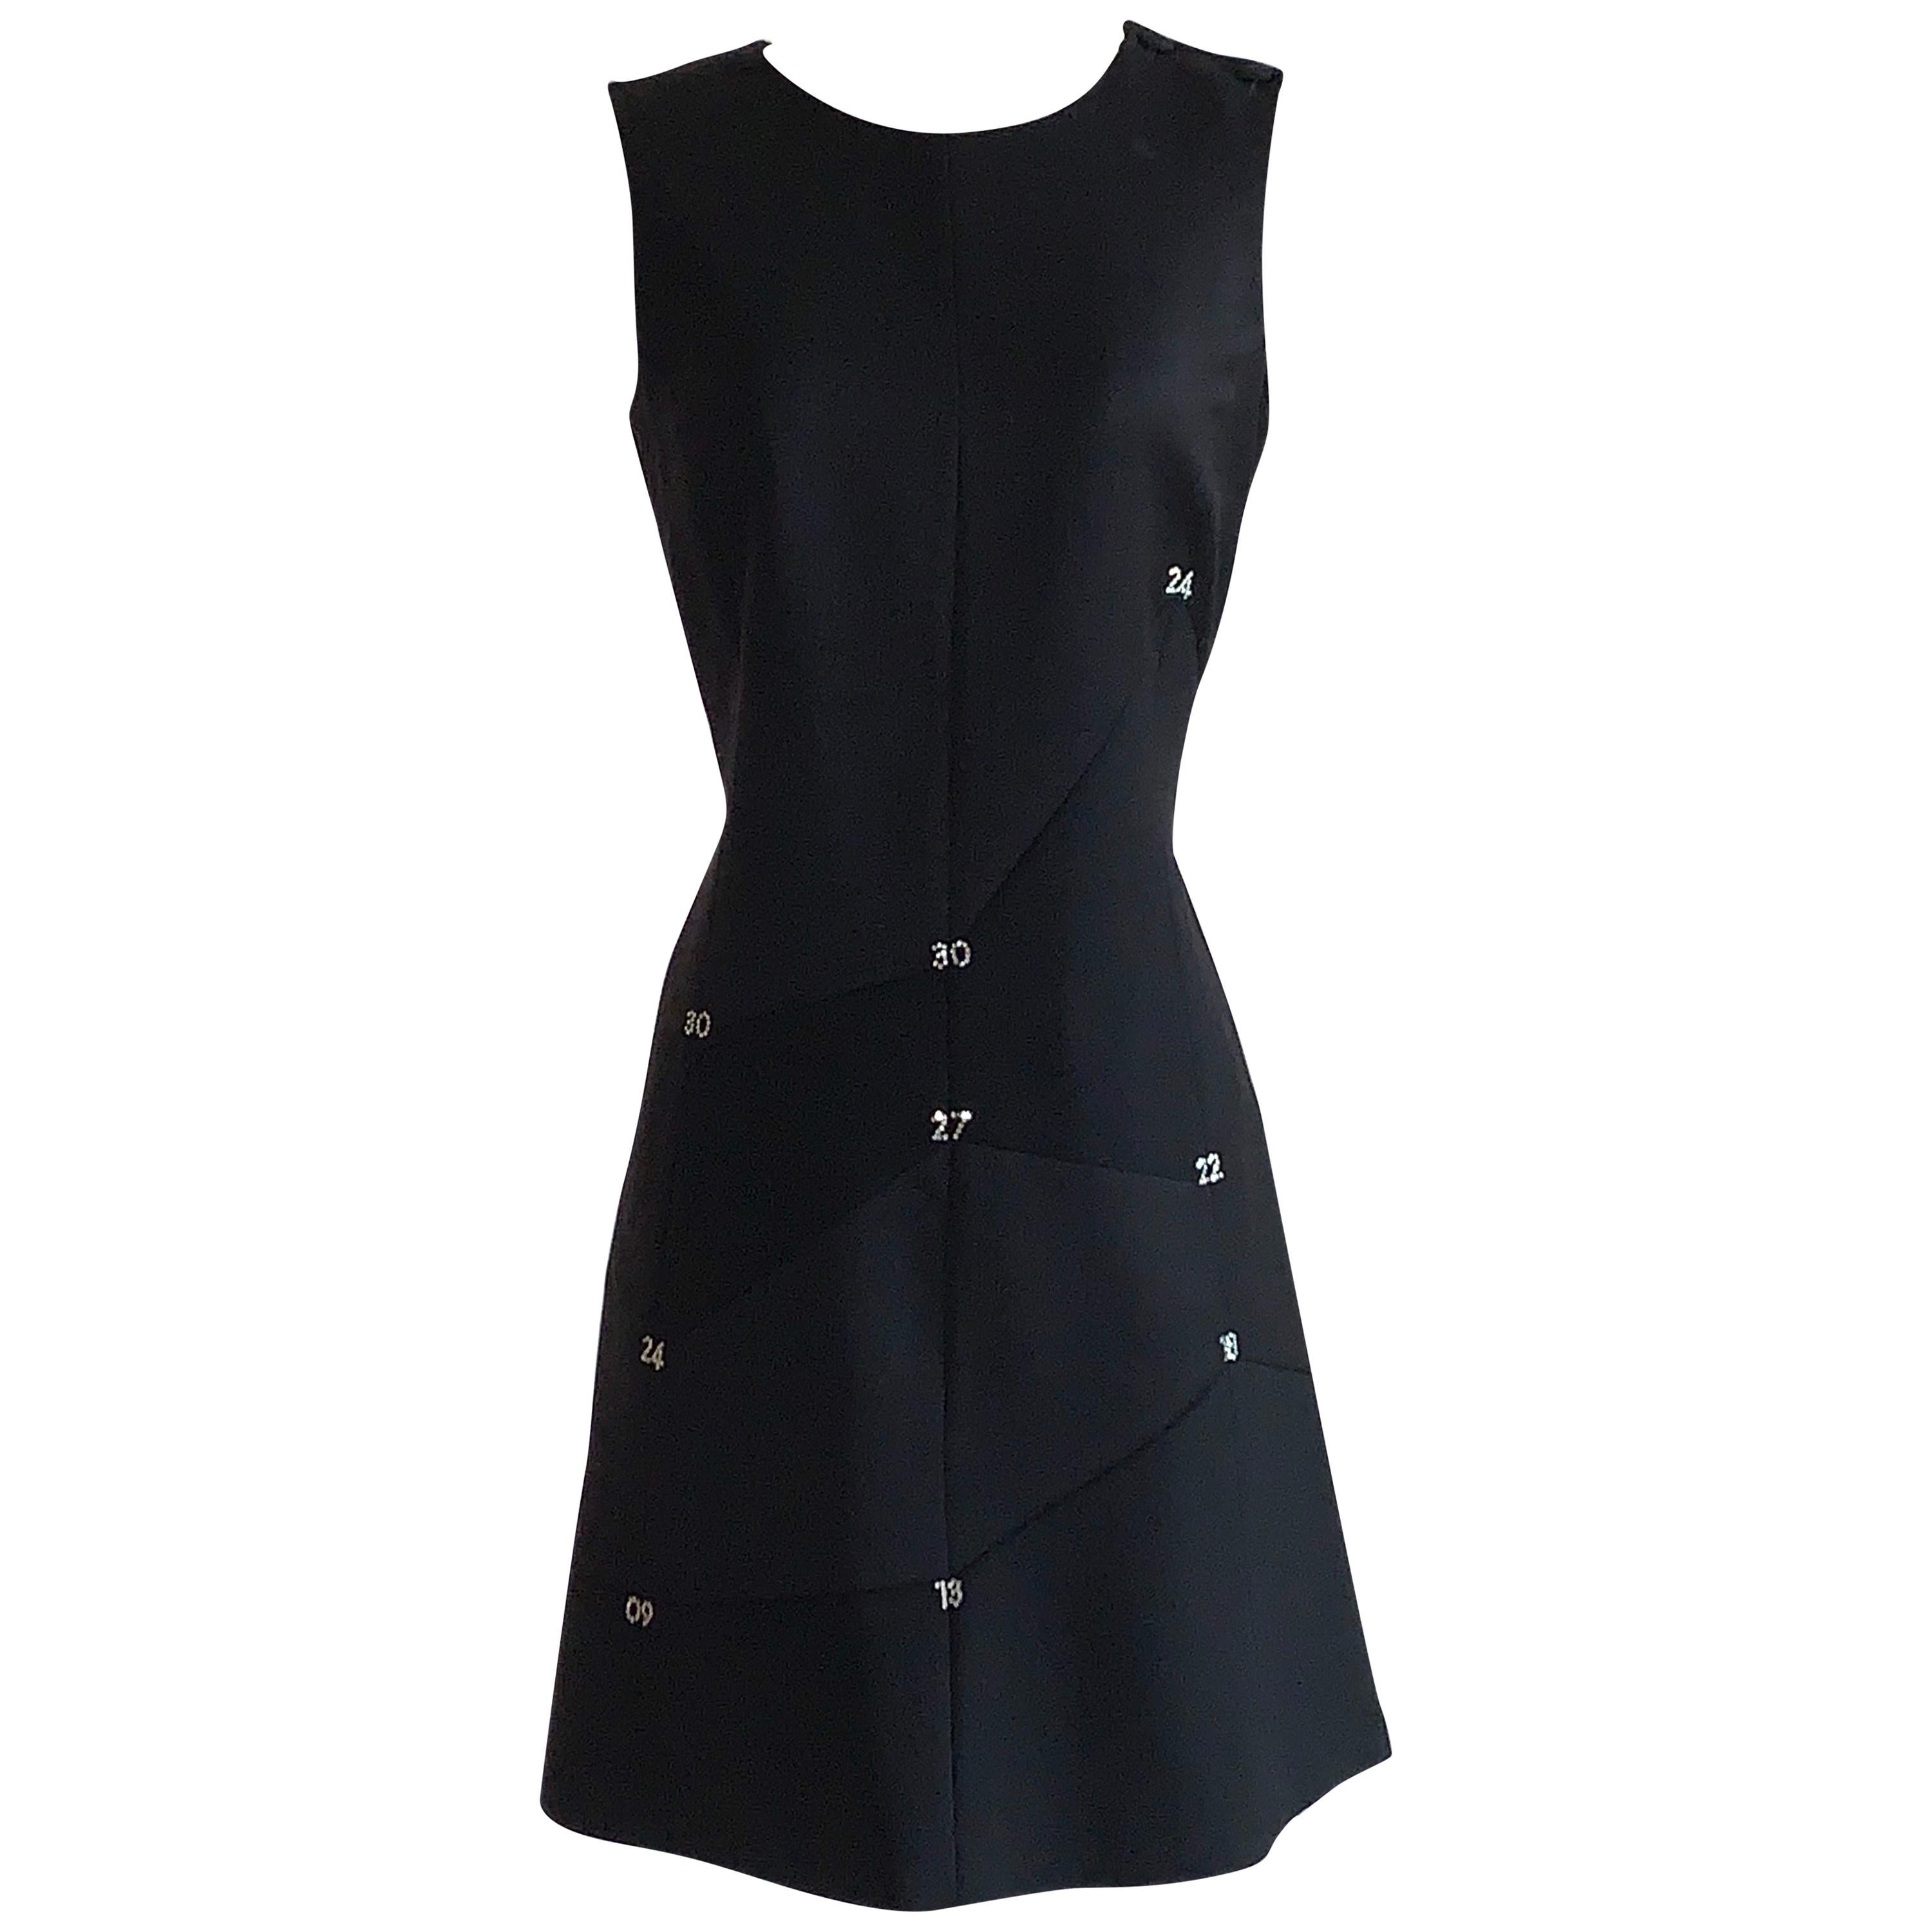 Moschino Black Rhinestone Numbers Dress Connect The Dots Coordinates Numerology